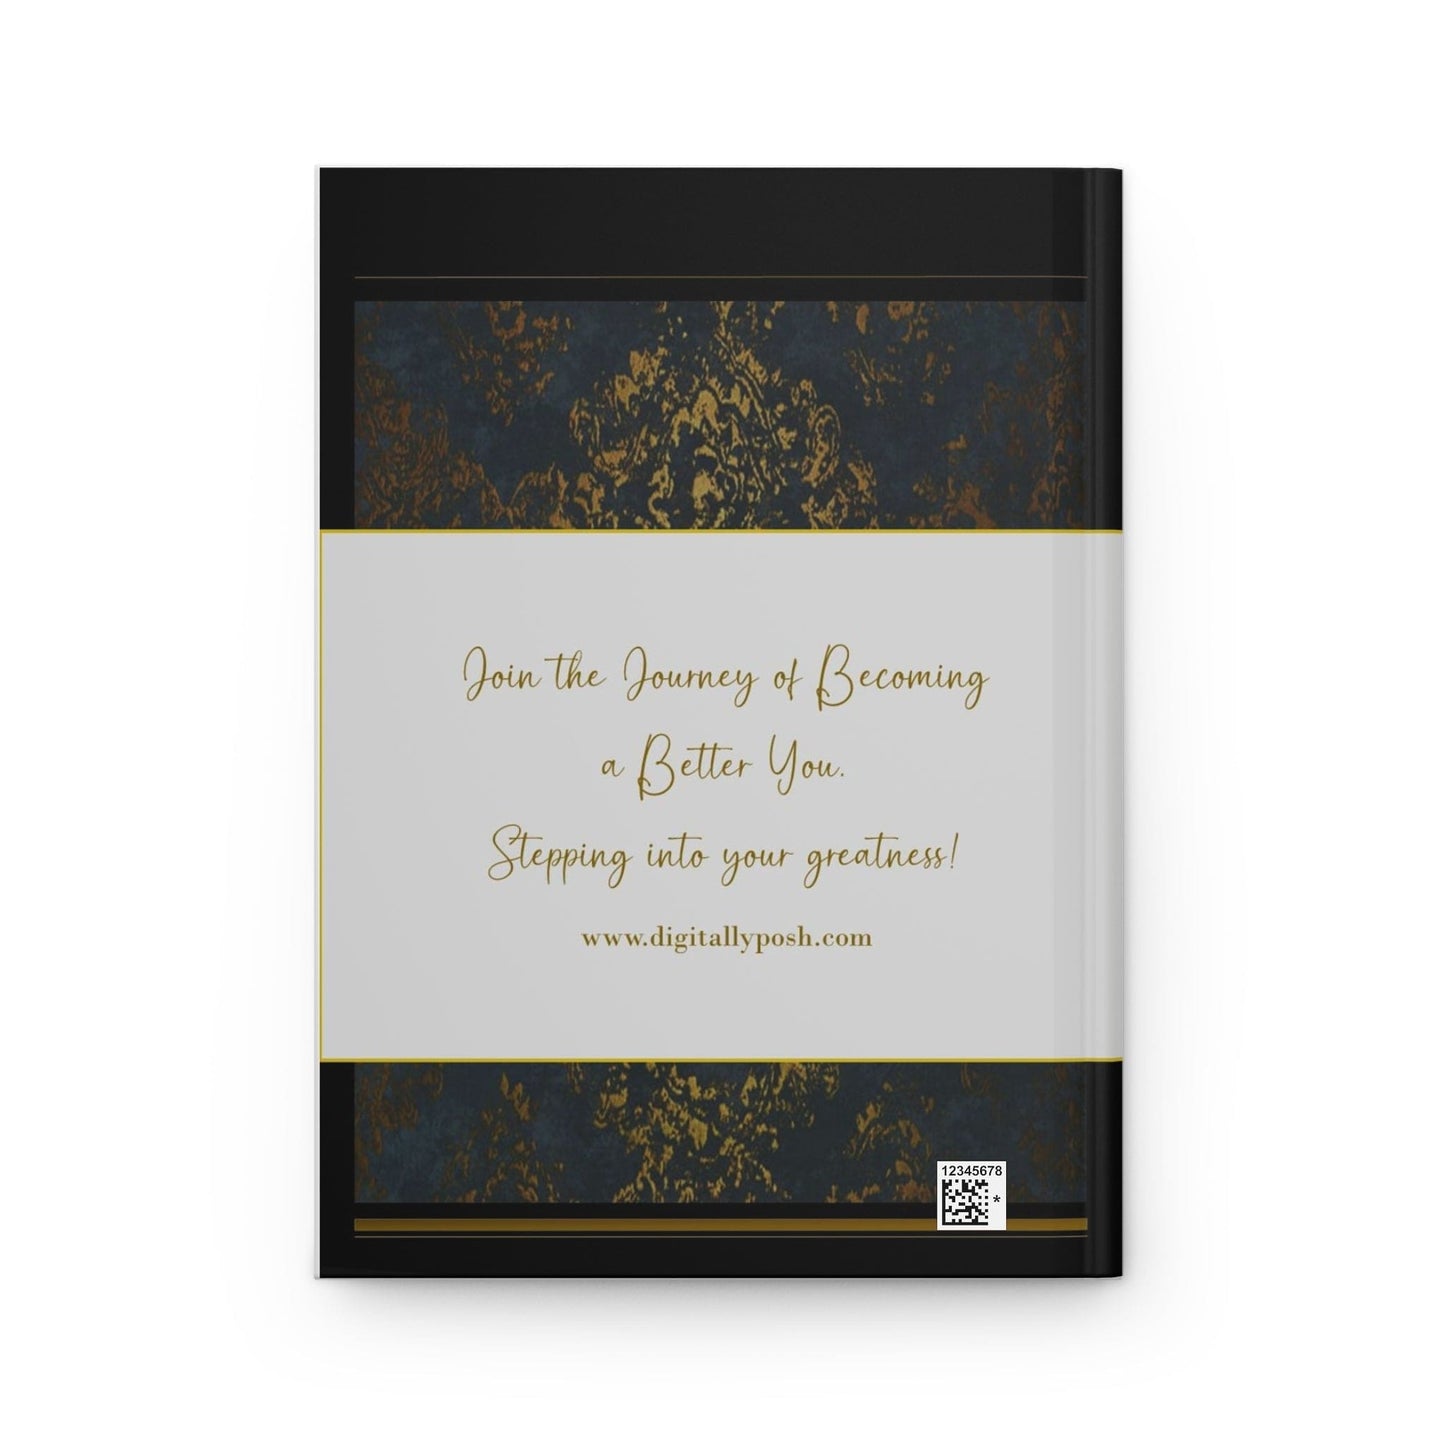 Personalized Journal: Capture Memories and Express Yourself with Customized Journaling. The Confident Beaute Journal